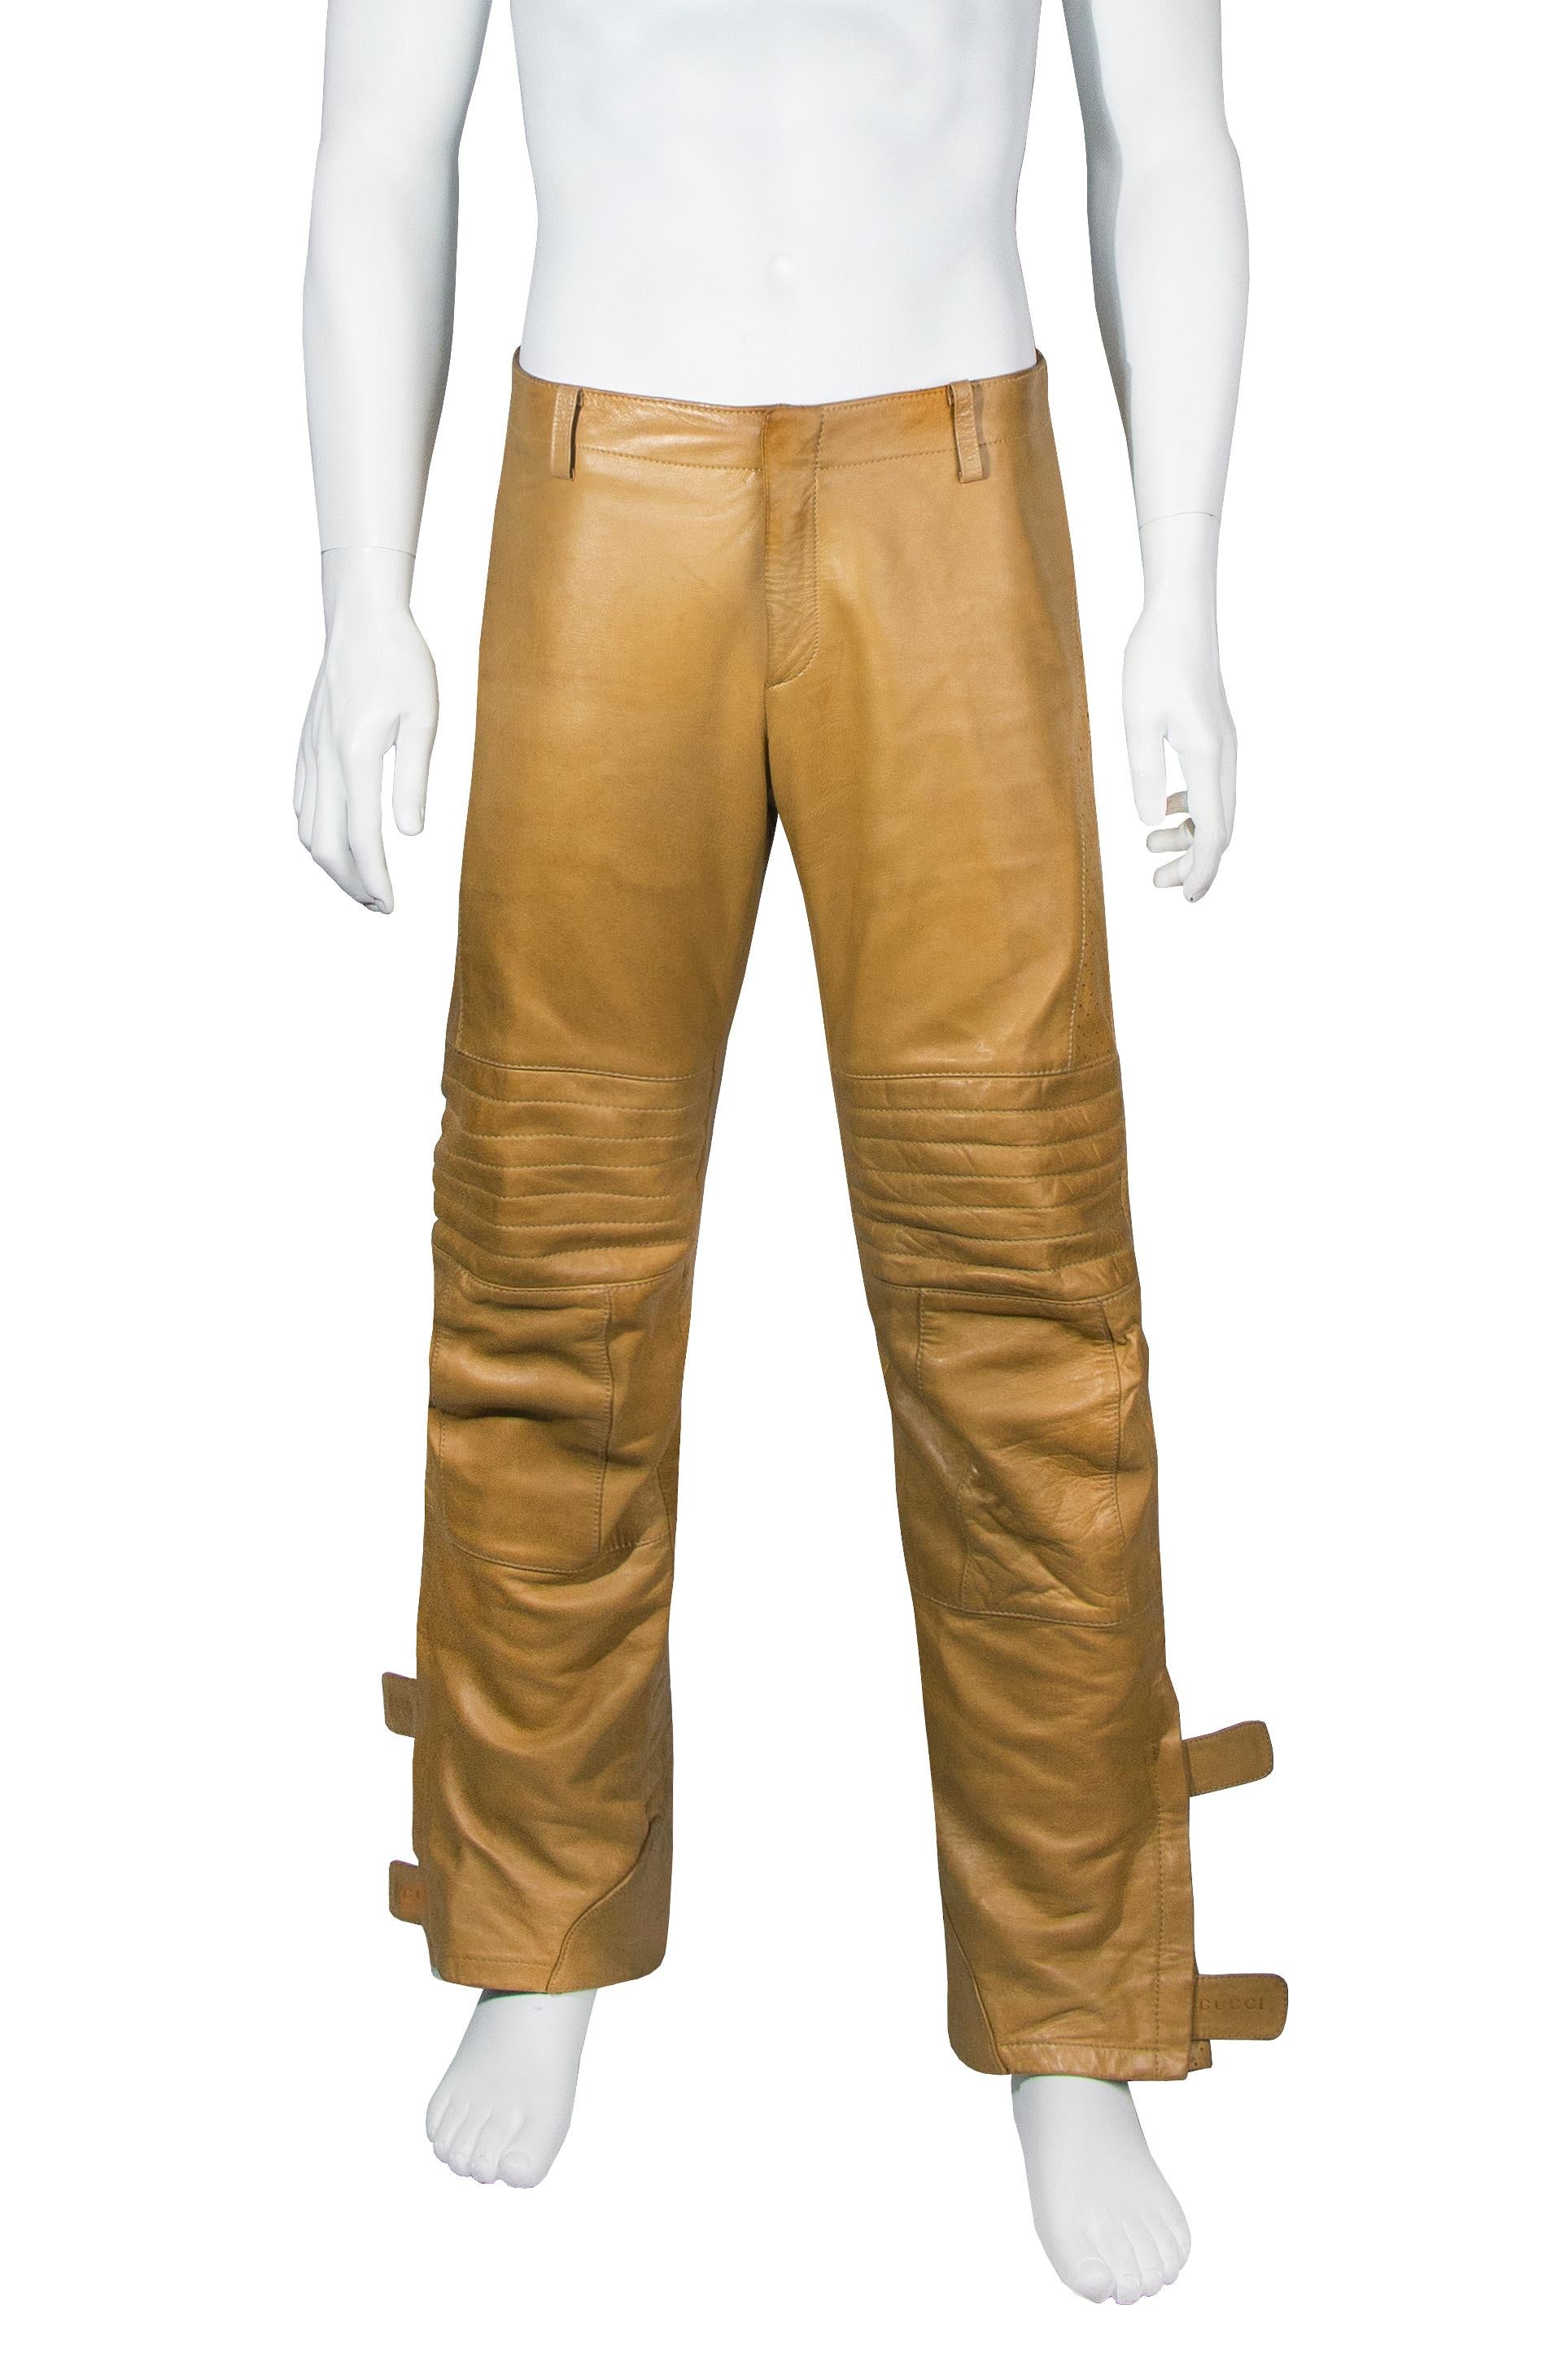 Gucci by Tom Ford men's tan leather motorcycle pants, fall-winter 2000. Shown in both the men's and women's runway shows of this season, these pants are truly an iconic design and a strong example of Ford's vision for the brand.

Made of supple